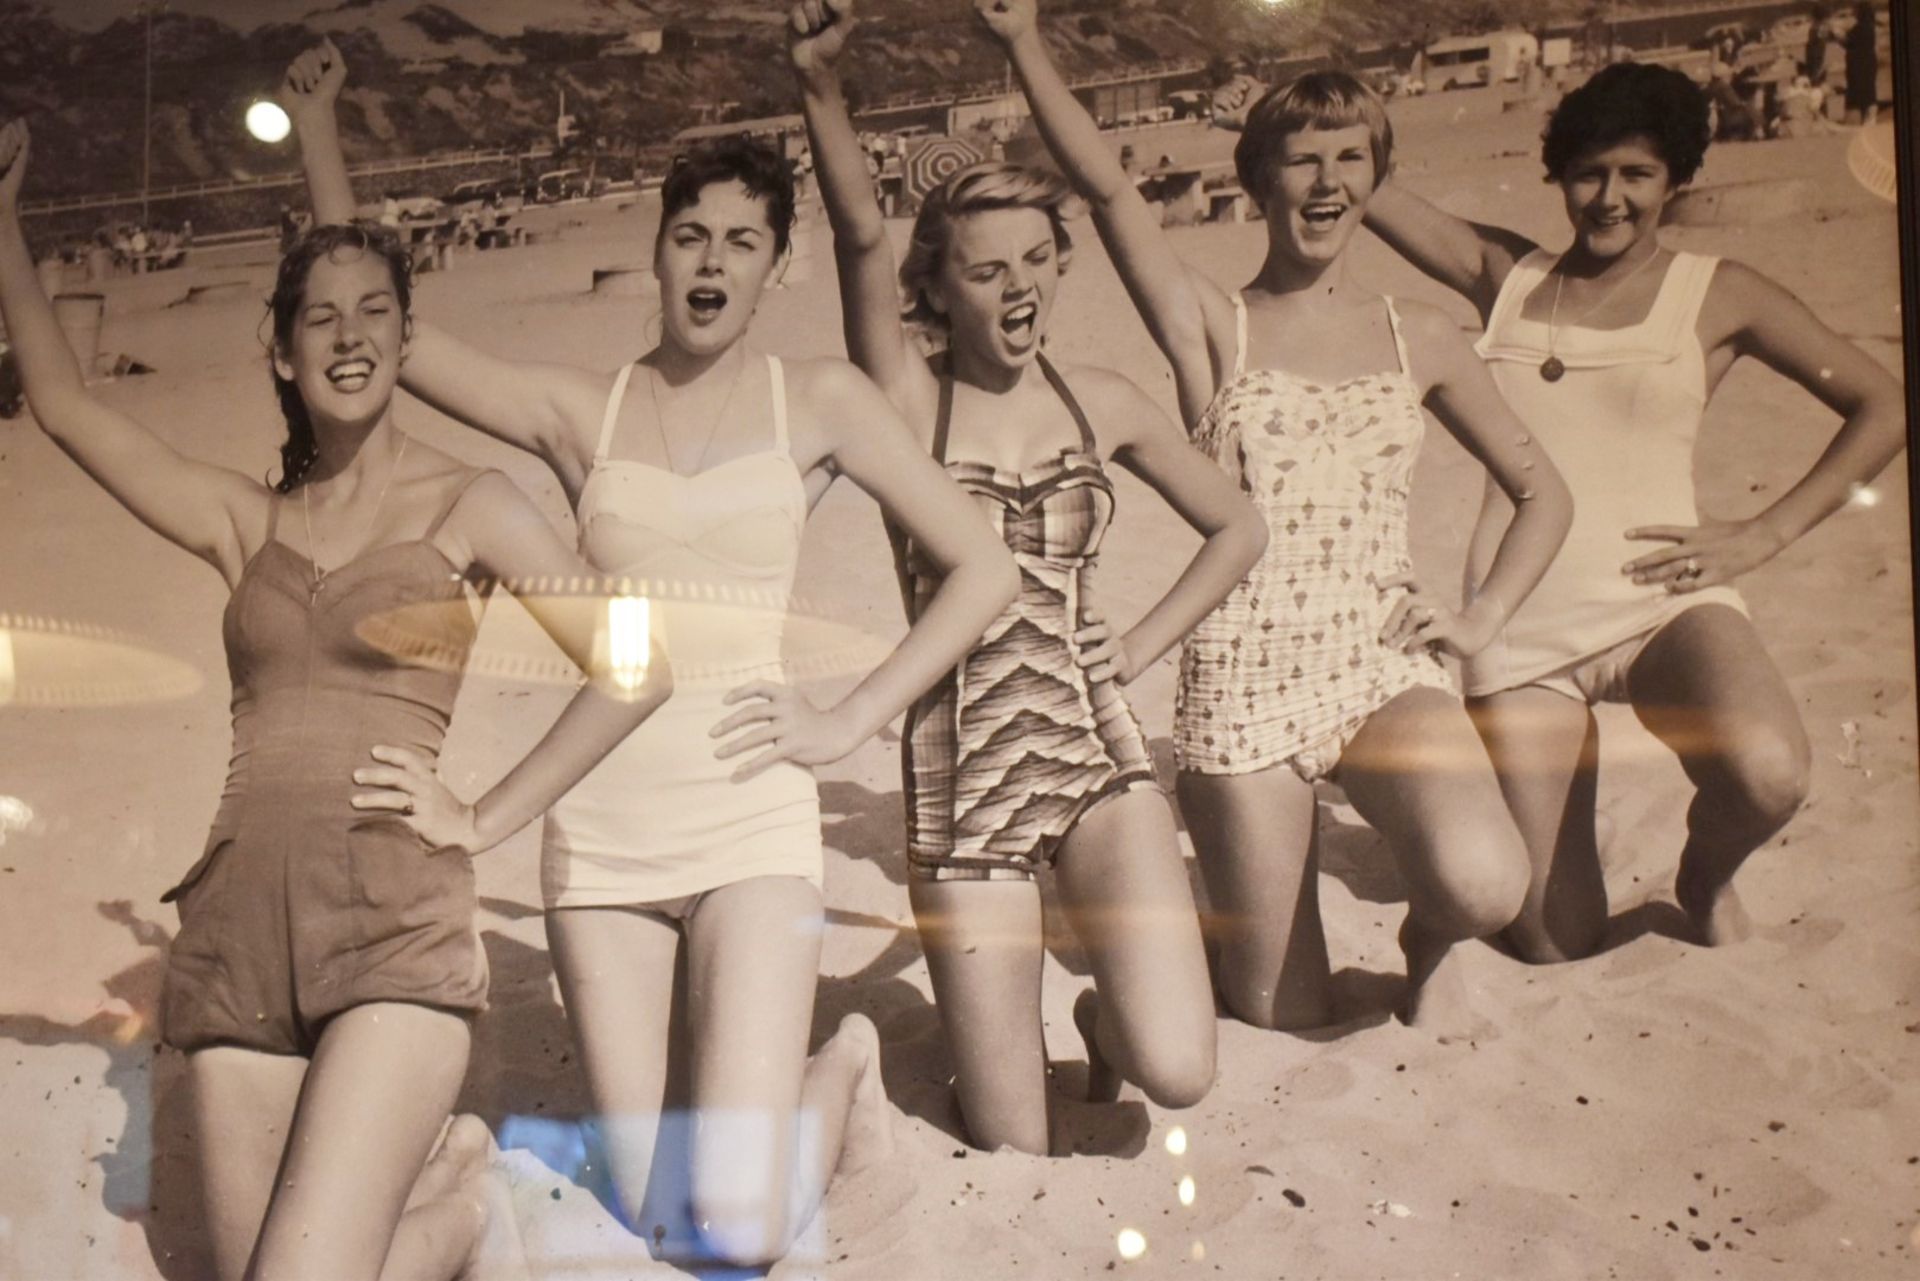 1 x Framed Picture Depicting Women on Beach - Size 107 x 85 cms - From Italian American Diner -